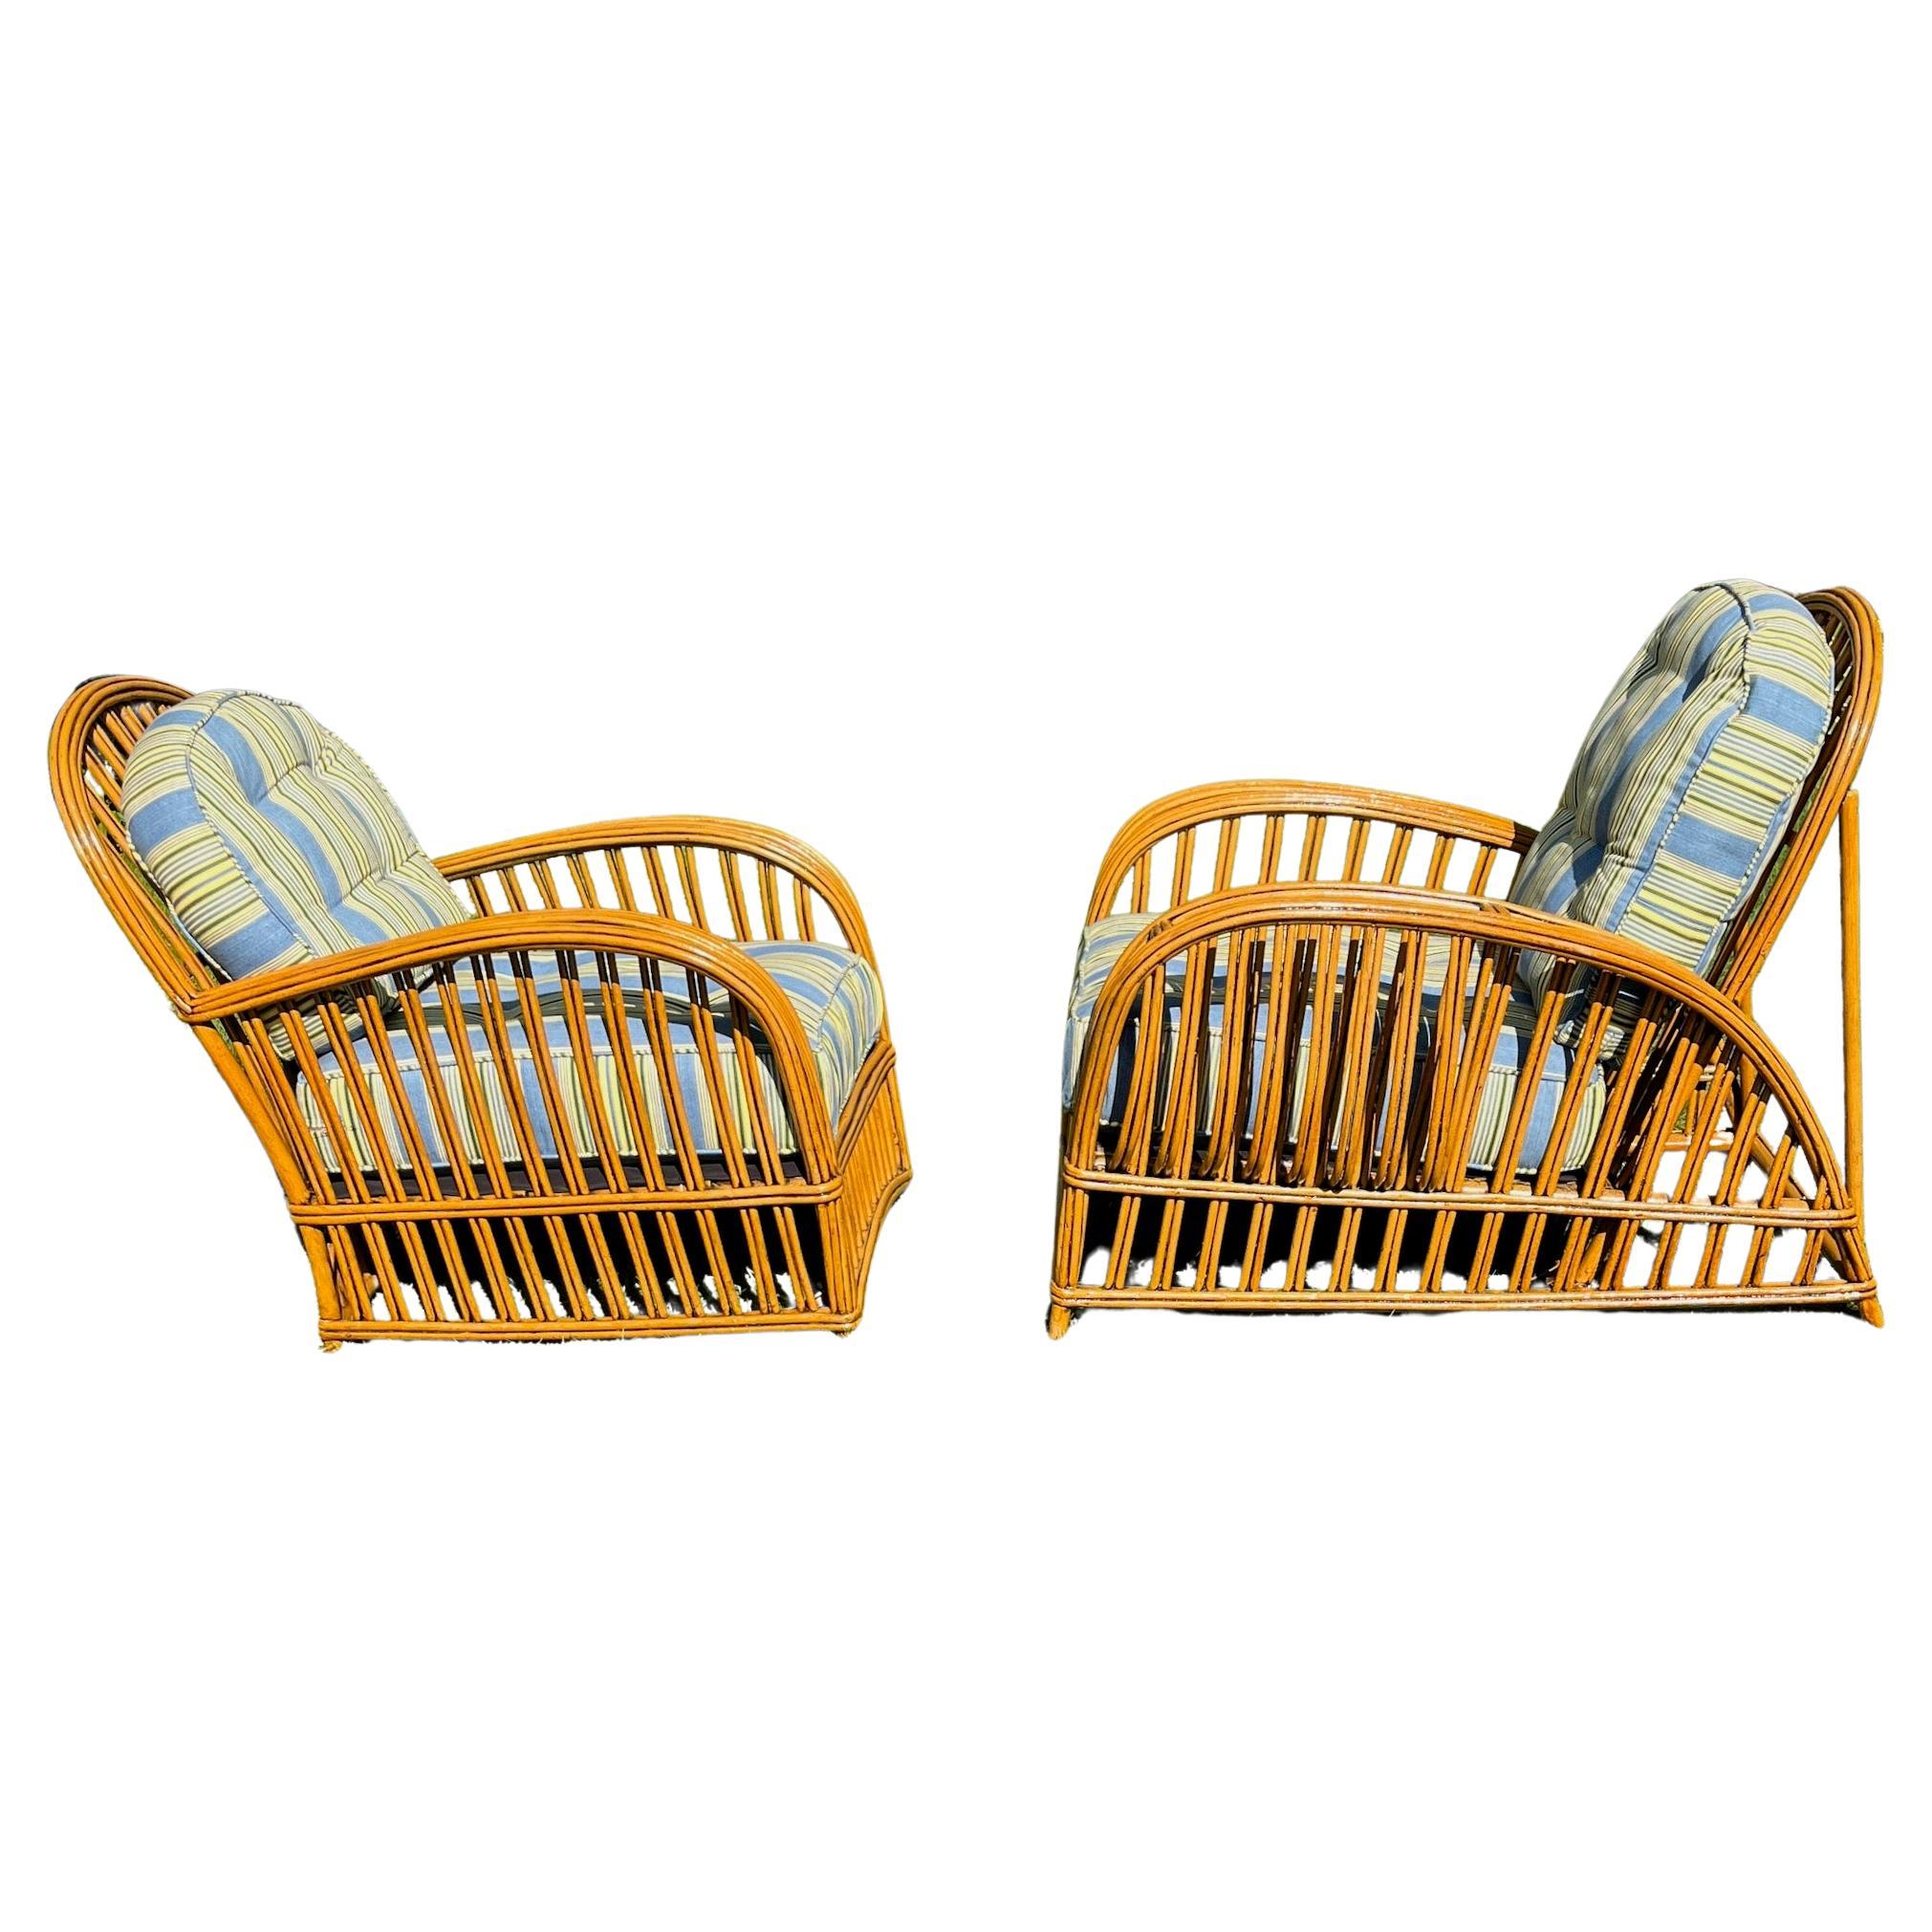 Pair of Heywood Wakefield Deco Rattan Ladies and Gents Chairs in Natural Finish In Good Condition For Sale In Nashua, NH